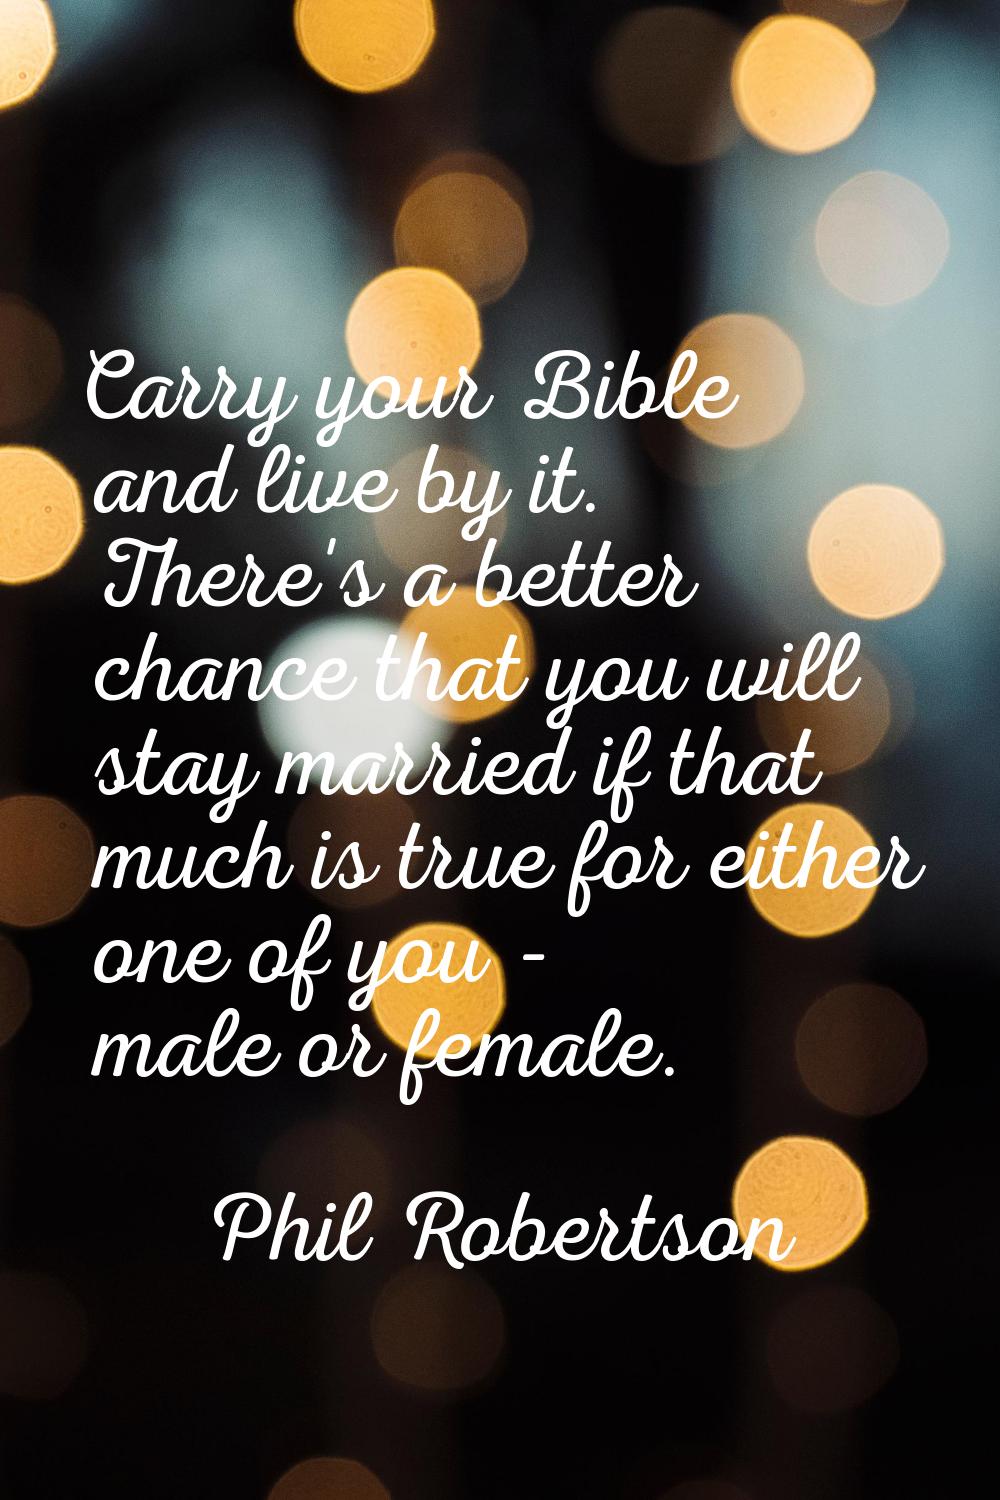 Carry your Bible and live by it. There's a better chance that you will stay married if that much is